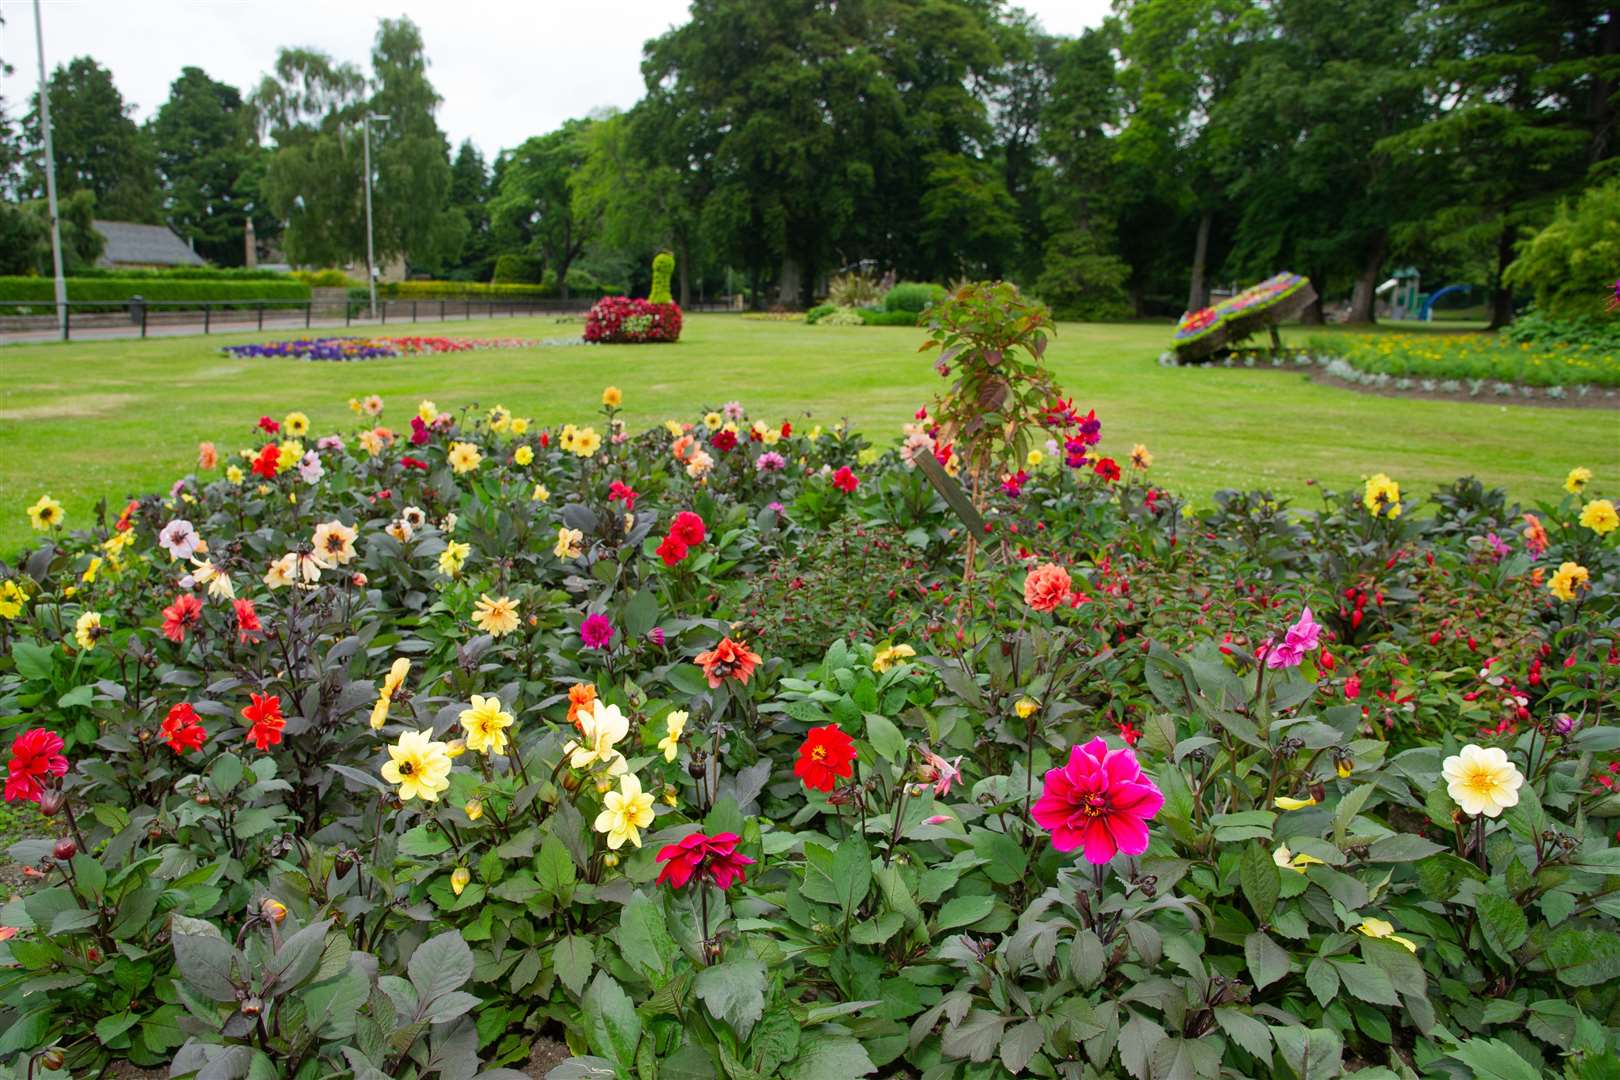 One of the many flower beds that bring colour to Forres.